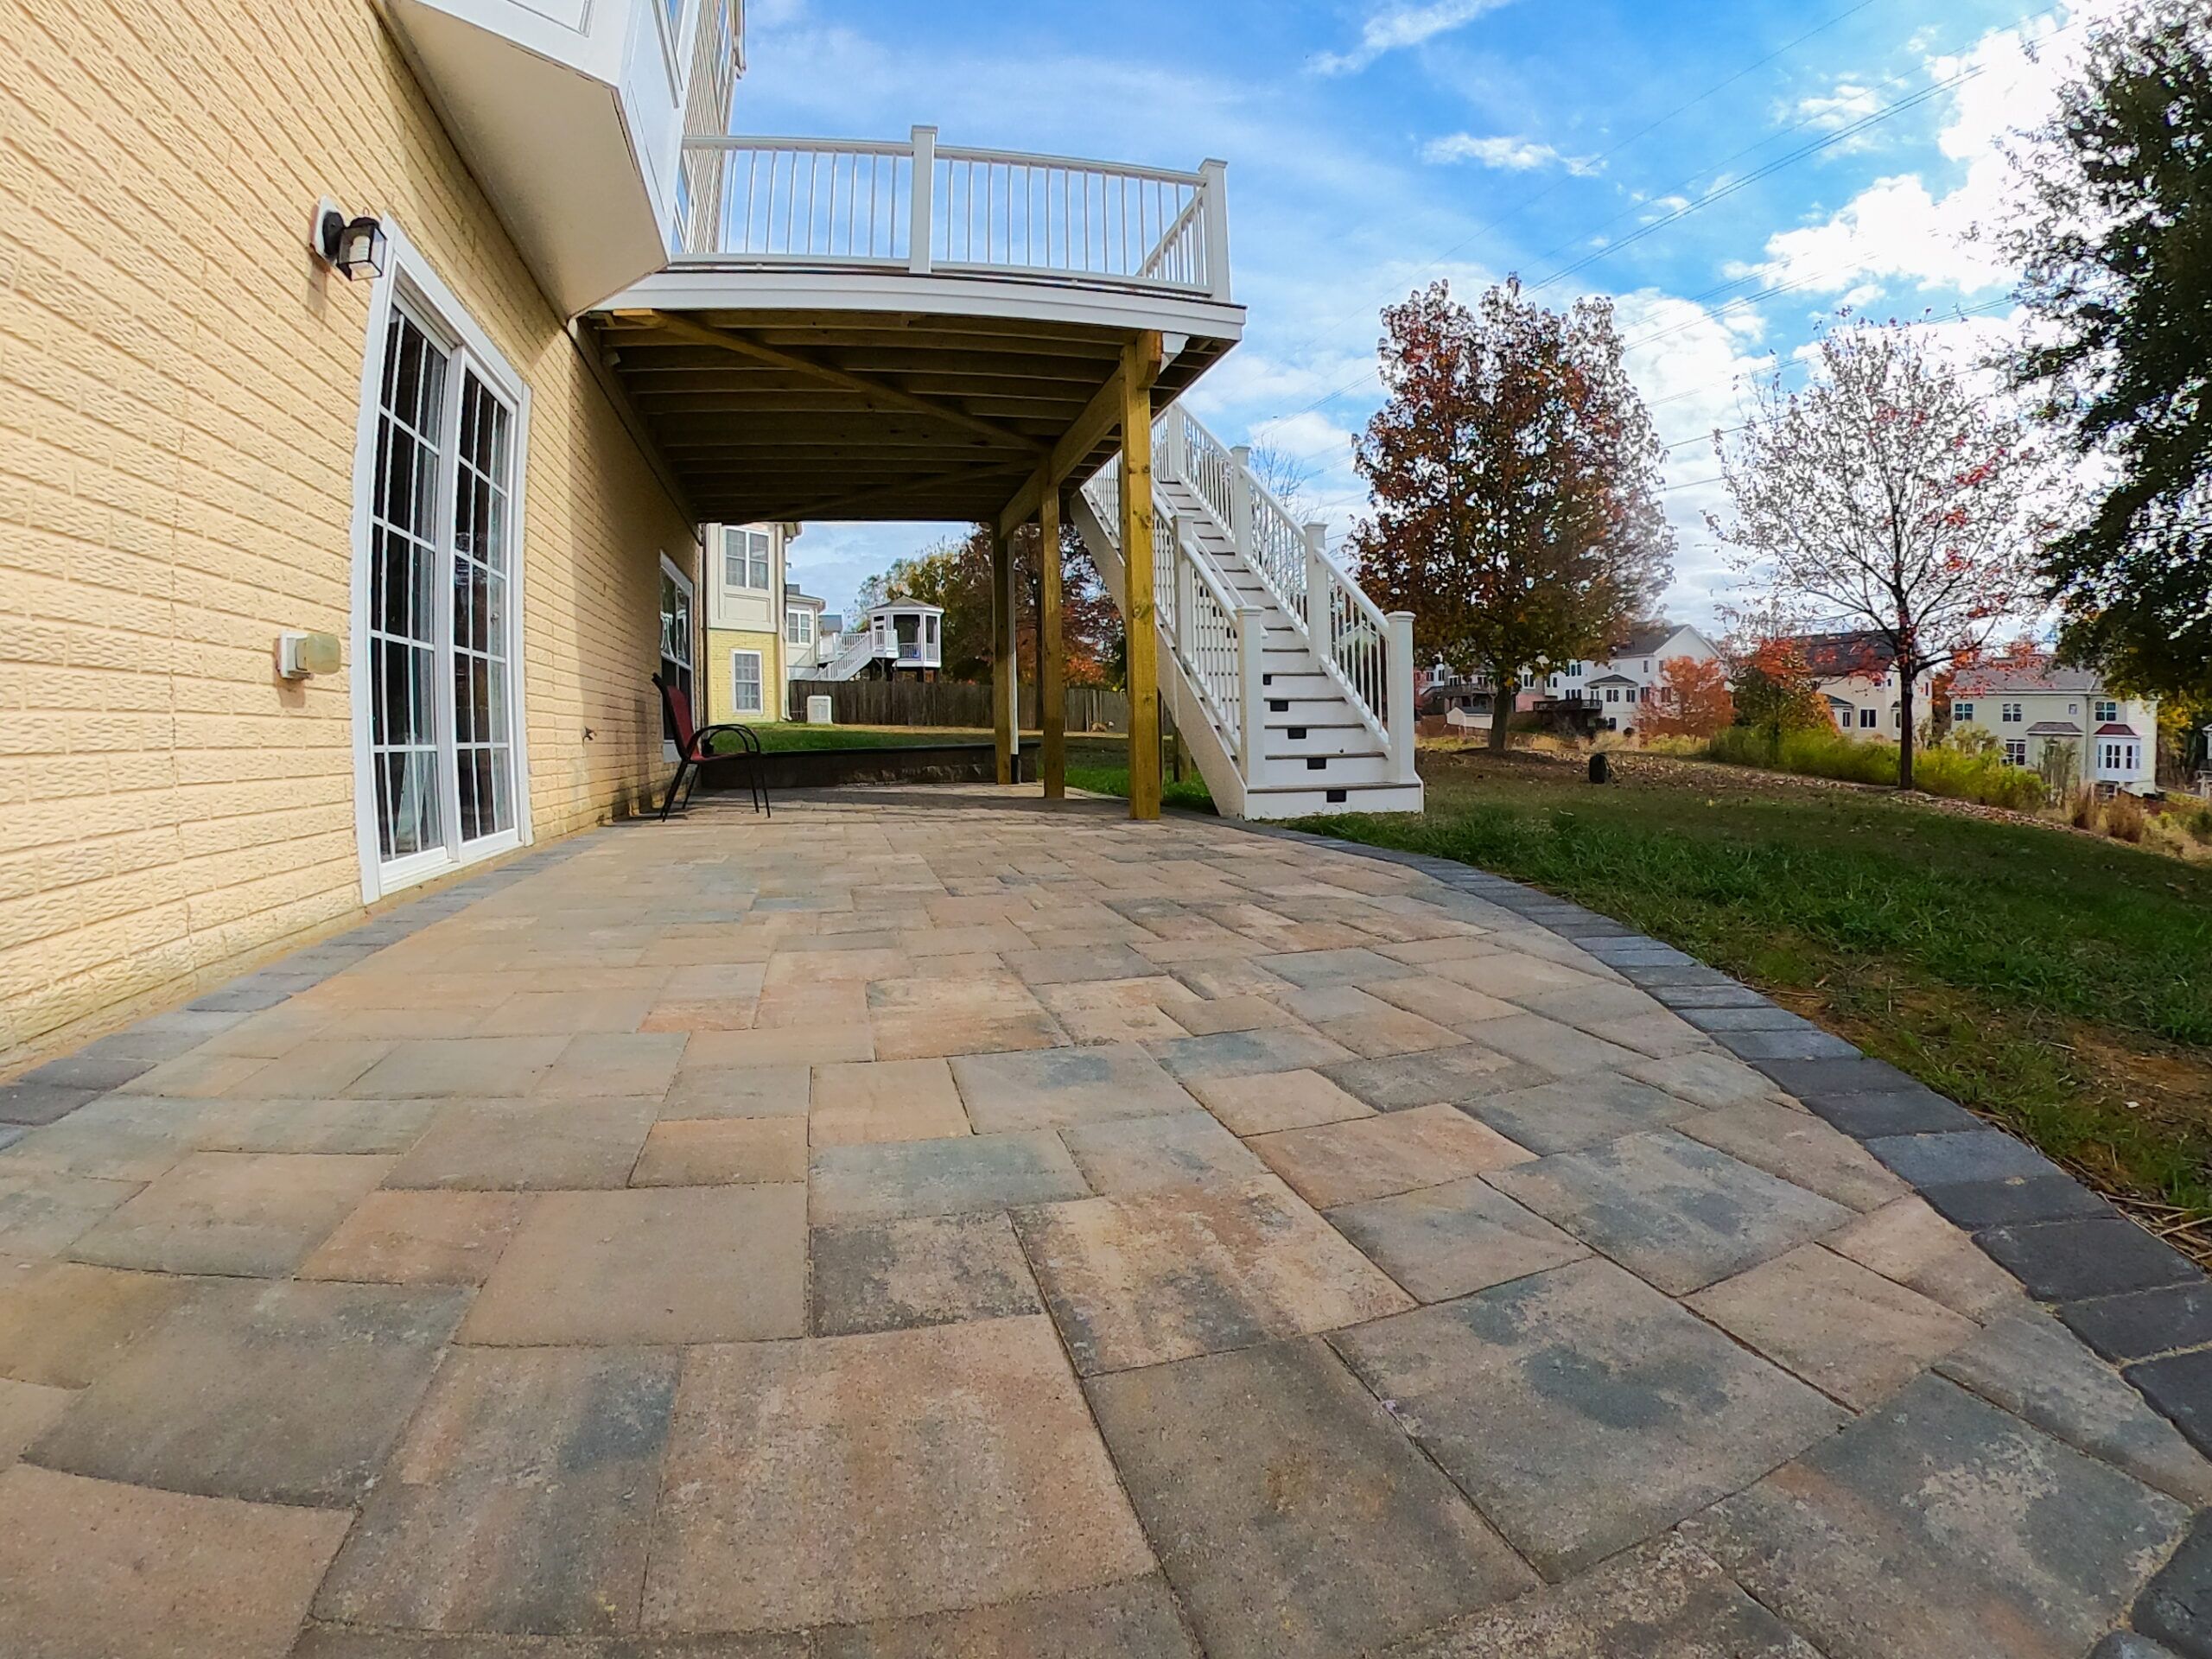 Custom patio pavers at the bottom and a stairway that goes up to the top floor to a Trex Deck